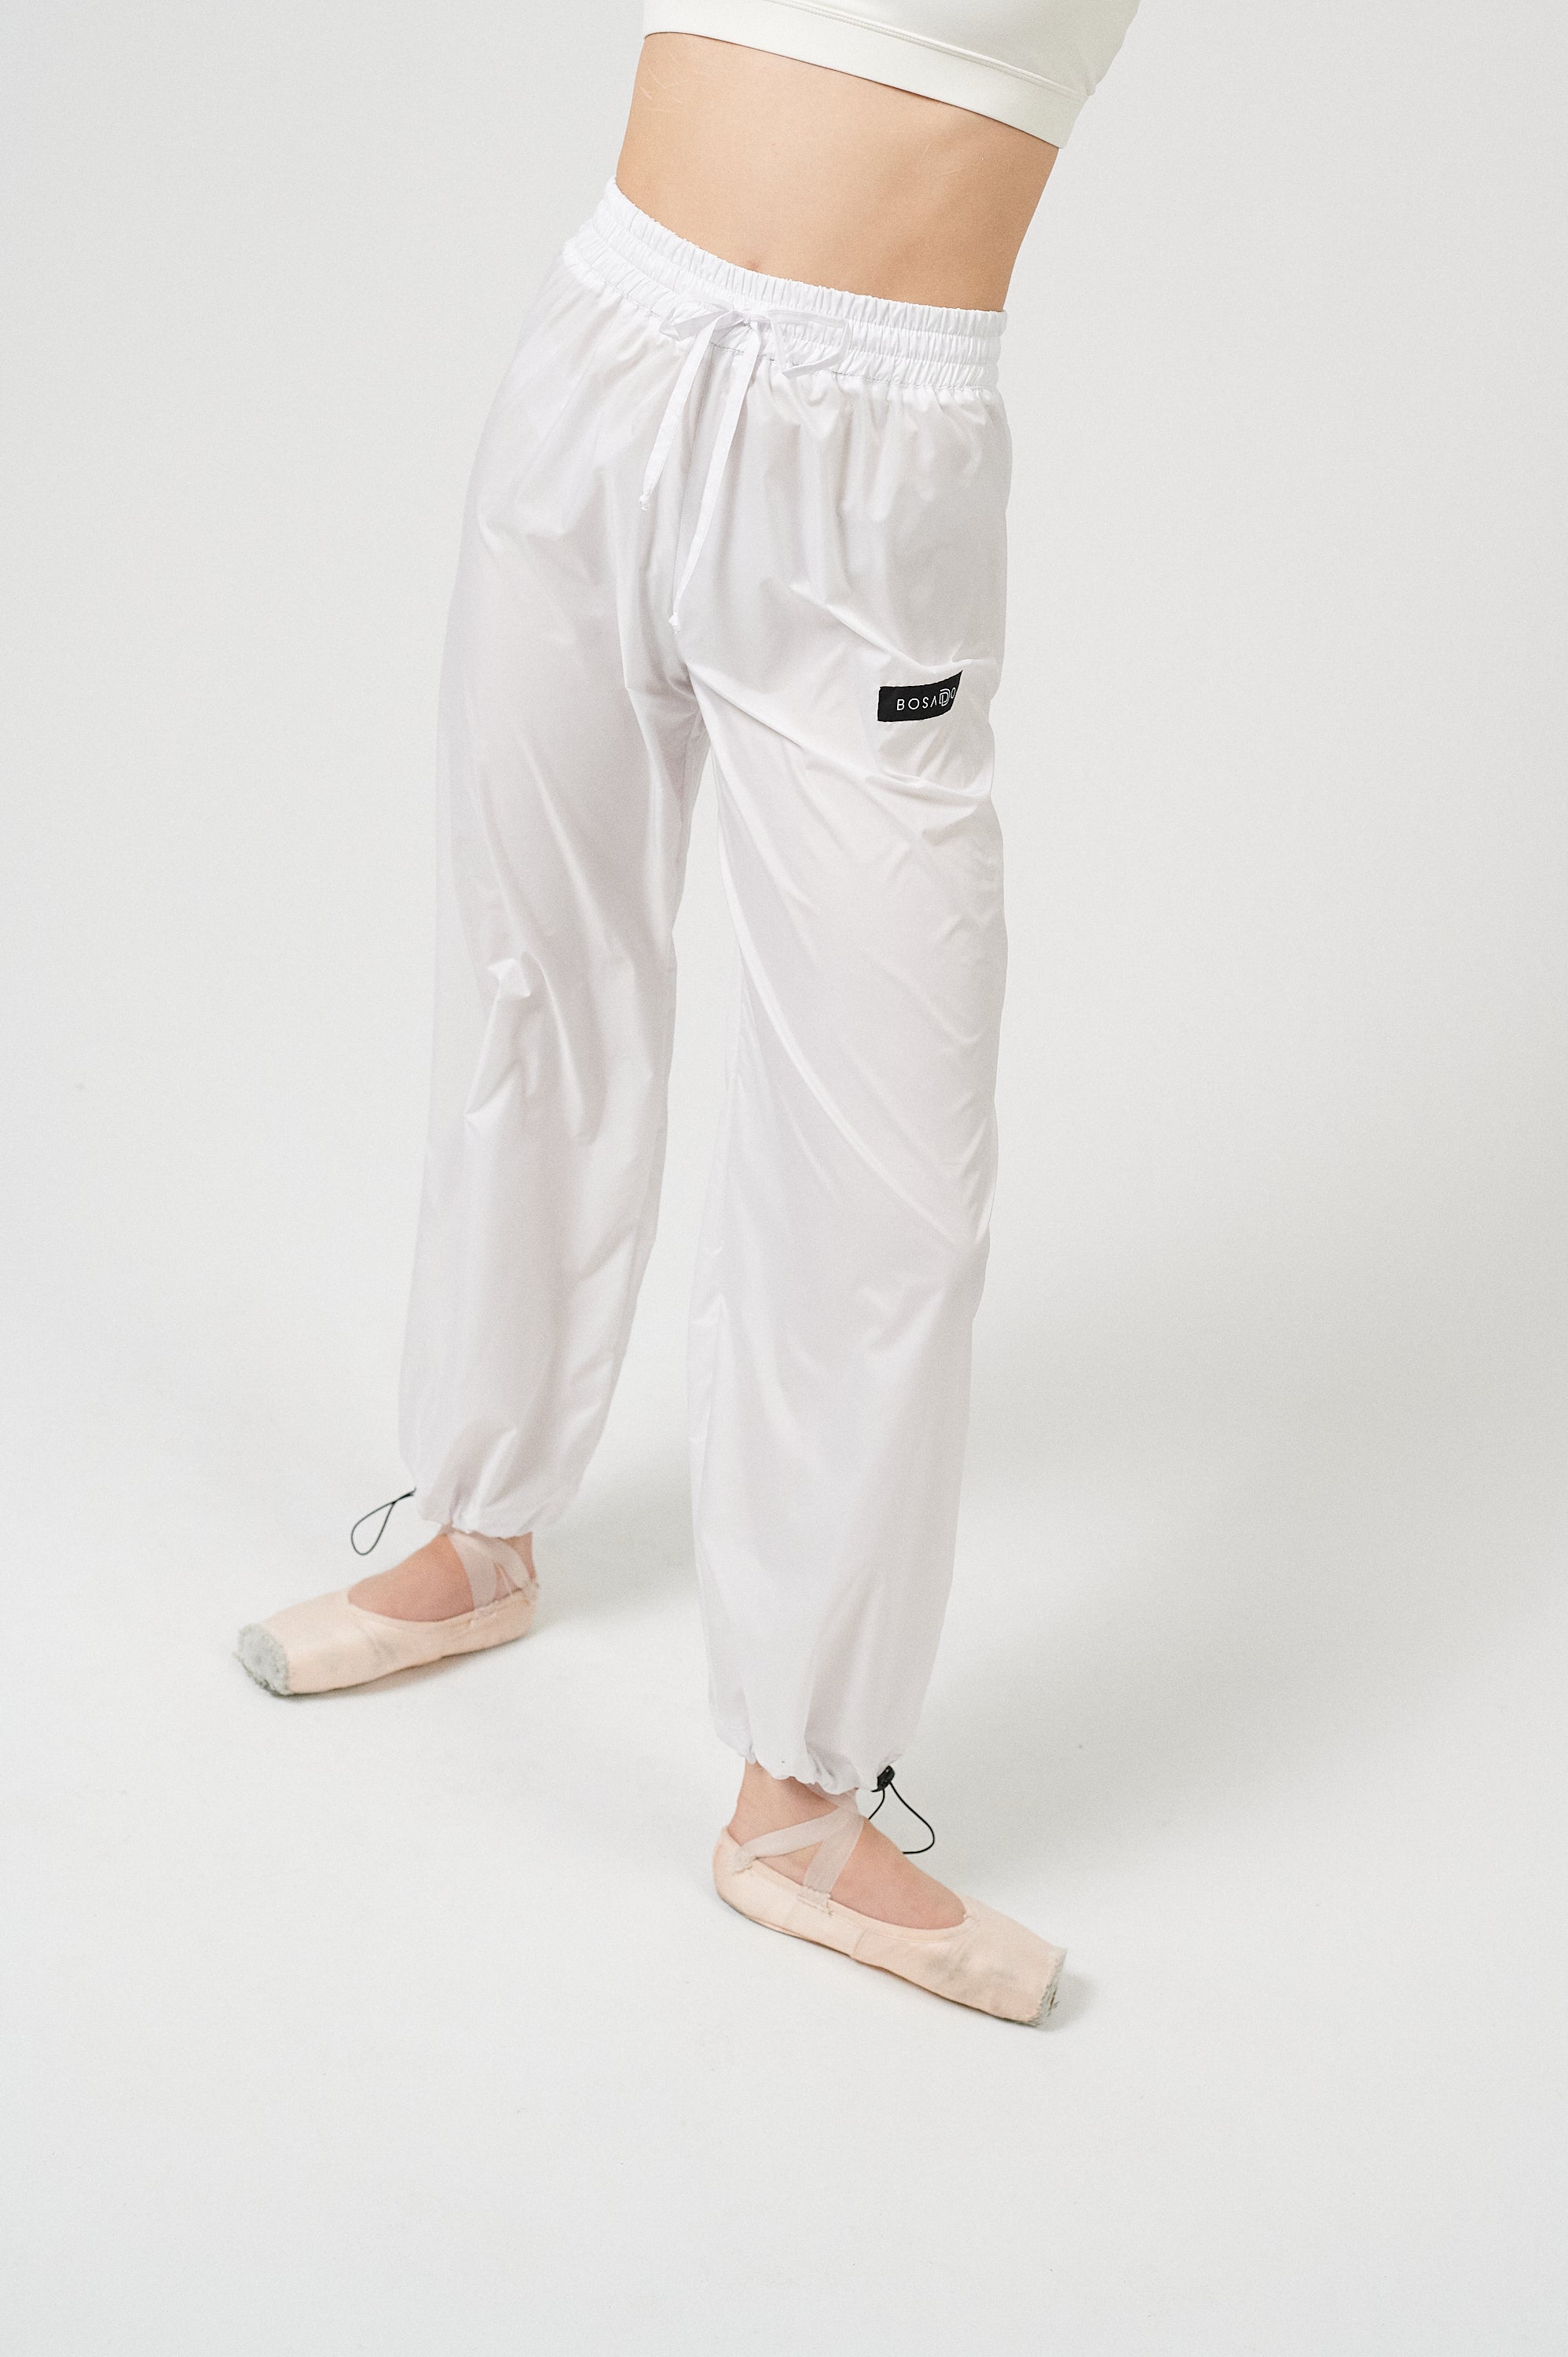 FUTURE GISELLE COLLECTION 24 | Cosmic white pants